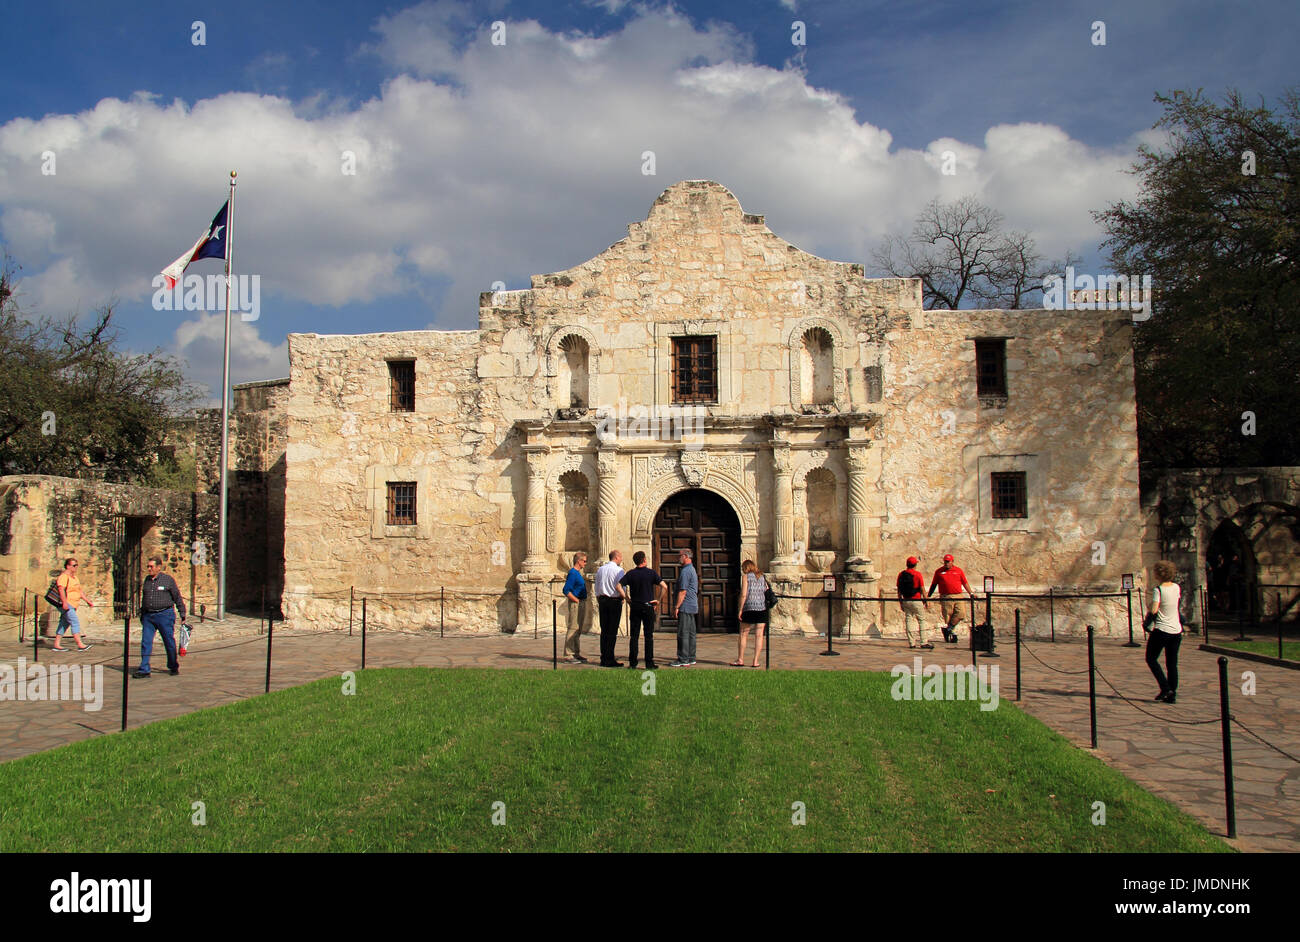 SAN ANTONIO, TX – FEBRUARY 27: Tourists and locals enjoy a visit to the old Alamo compound, one of San Antonio’s main attractions February 27, 2017 Stock Photo